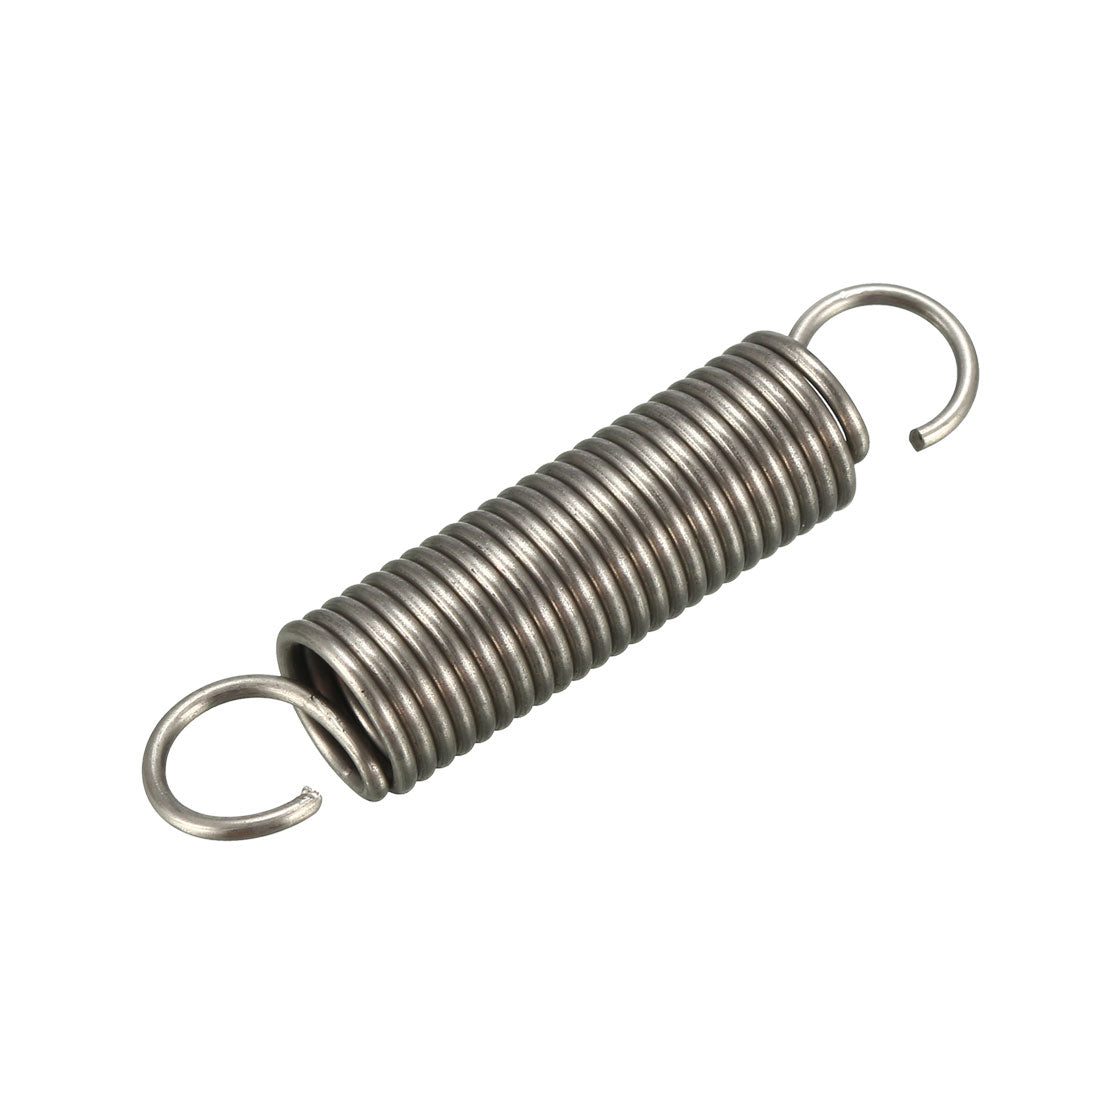 uxcell Uxcell Extended Tension Spring Wire Diameter 0.047", OD 0.39", Free Length 1.97" 5pcs